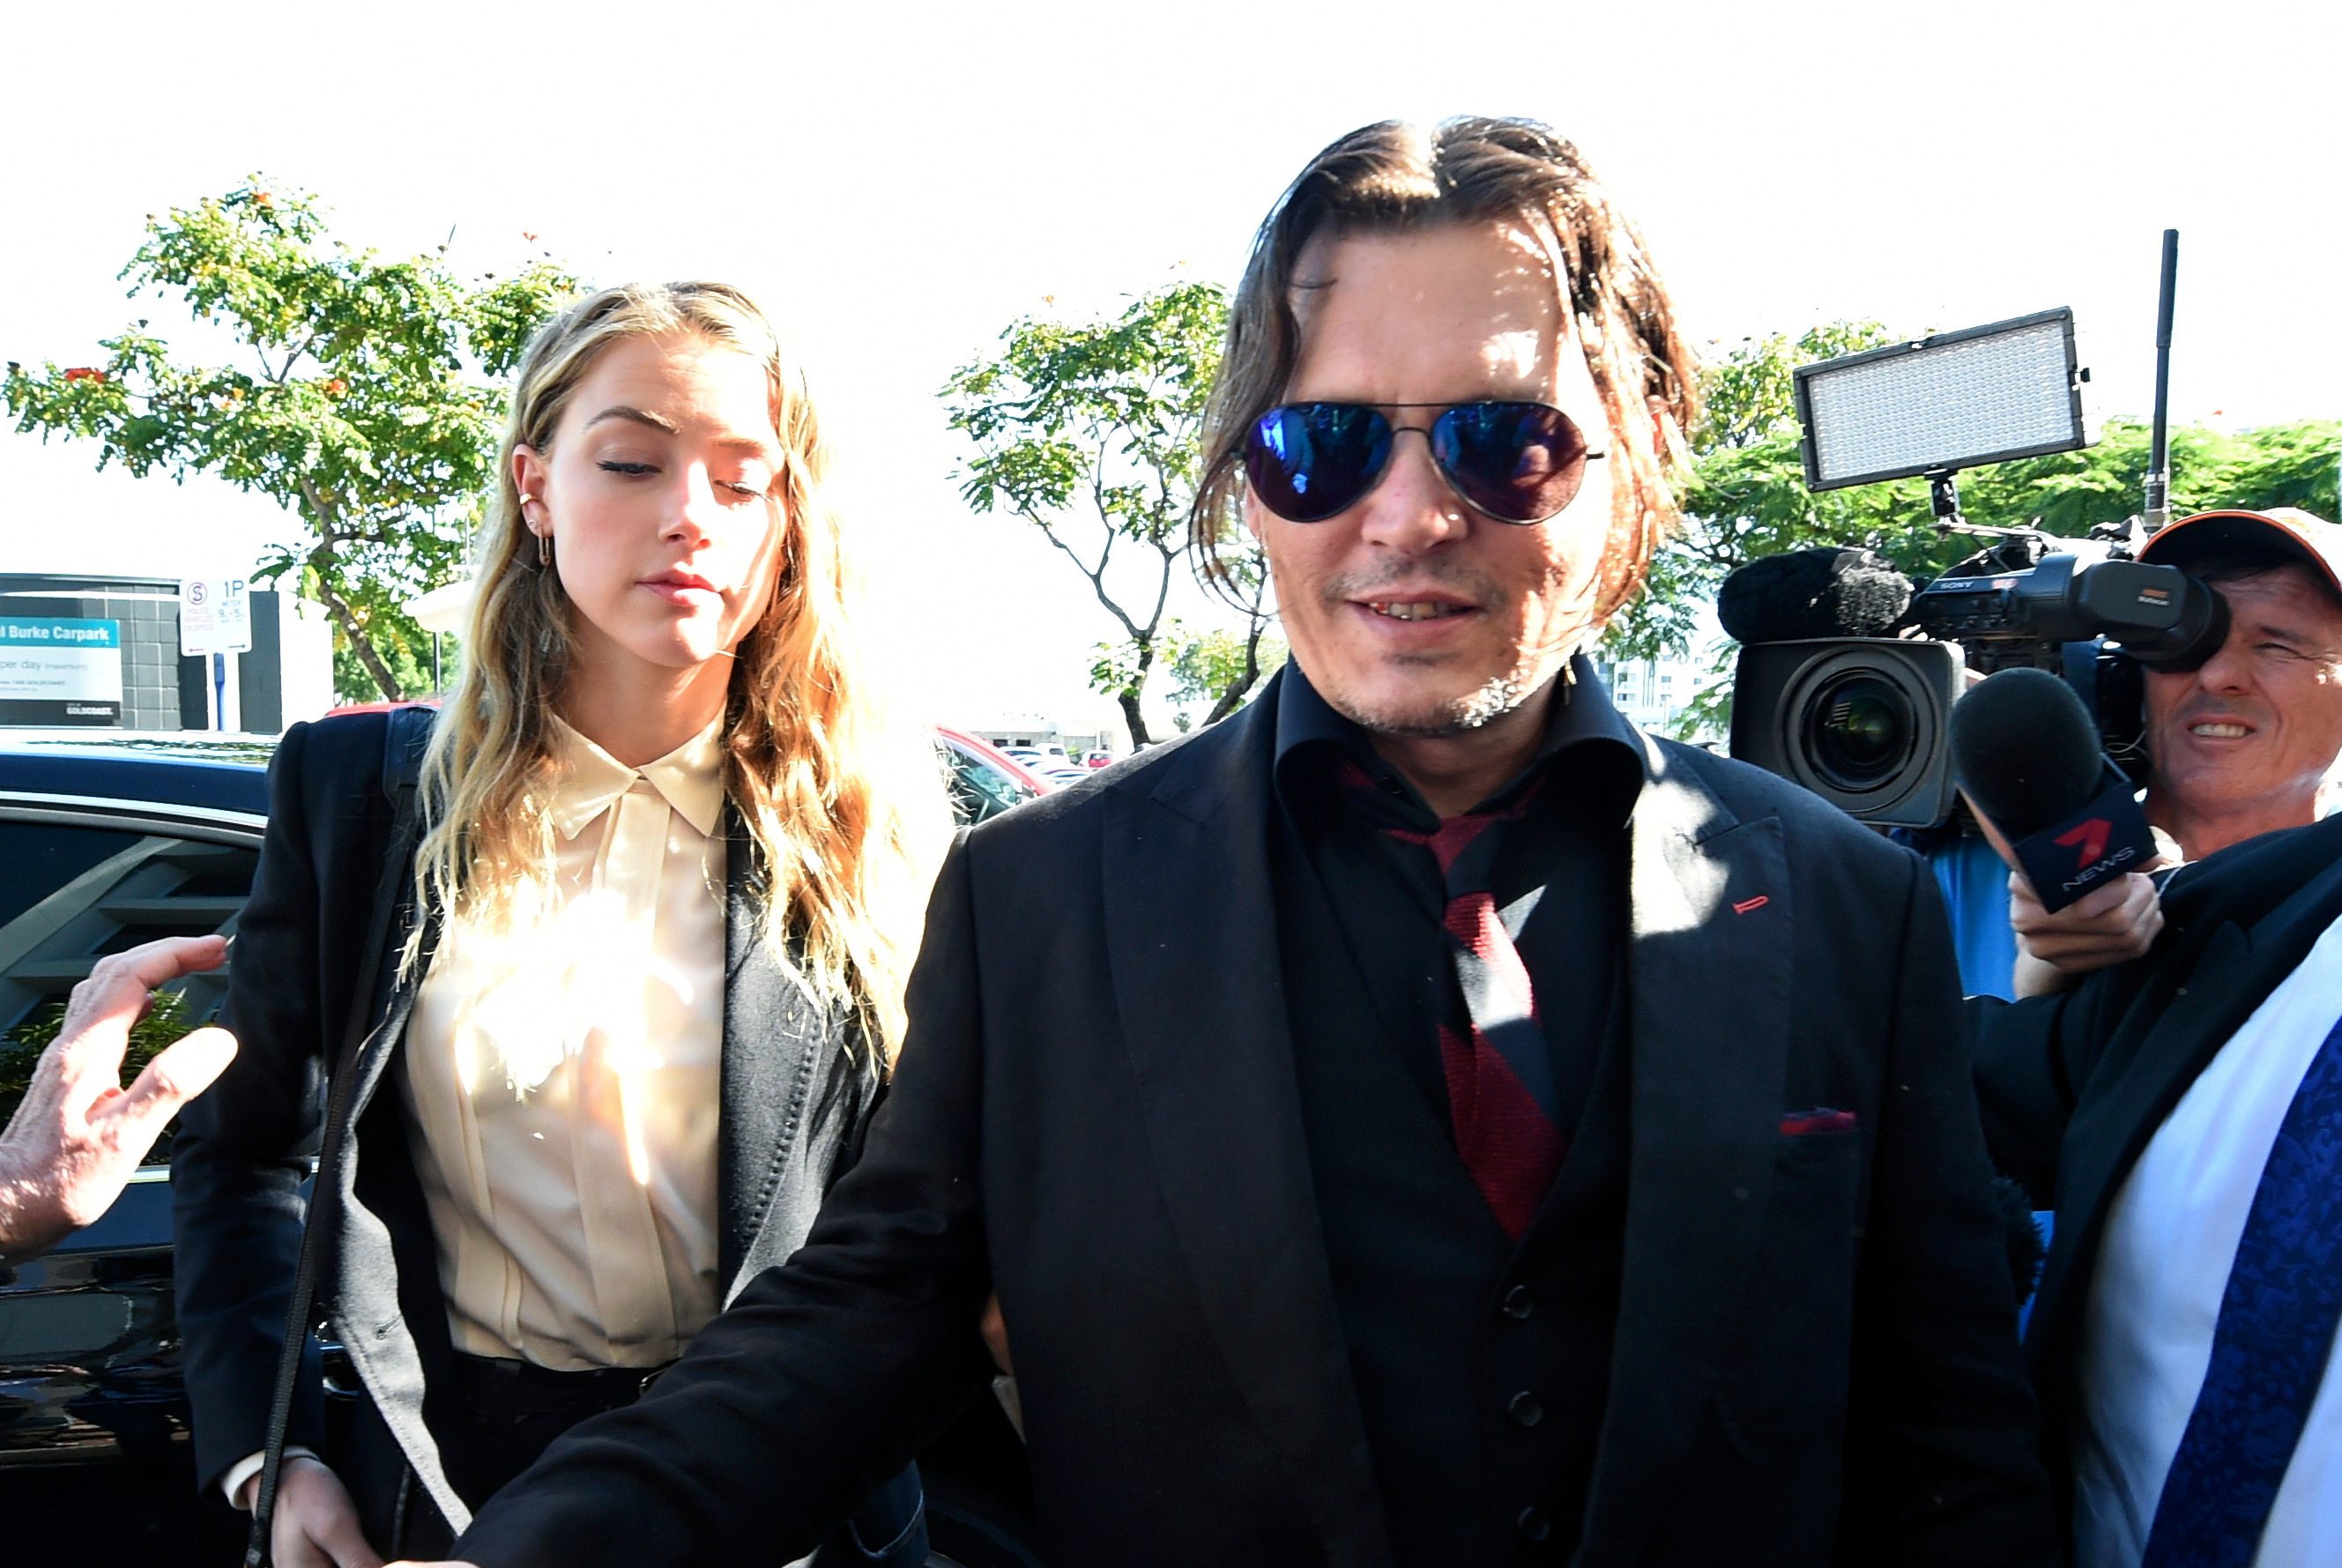 JOHNNY DEPP AND AMBER HEARD. Johnny Depp  and his wife, actress Amber Heard arrive at Southport Magistrates Court on the Gold Coast on April 18. Photo by Dave Hunt Australia and New Zealand Out/EPA   